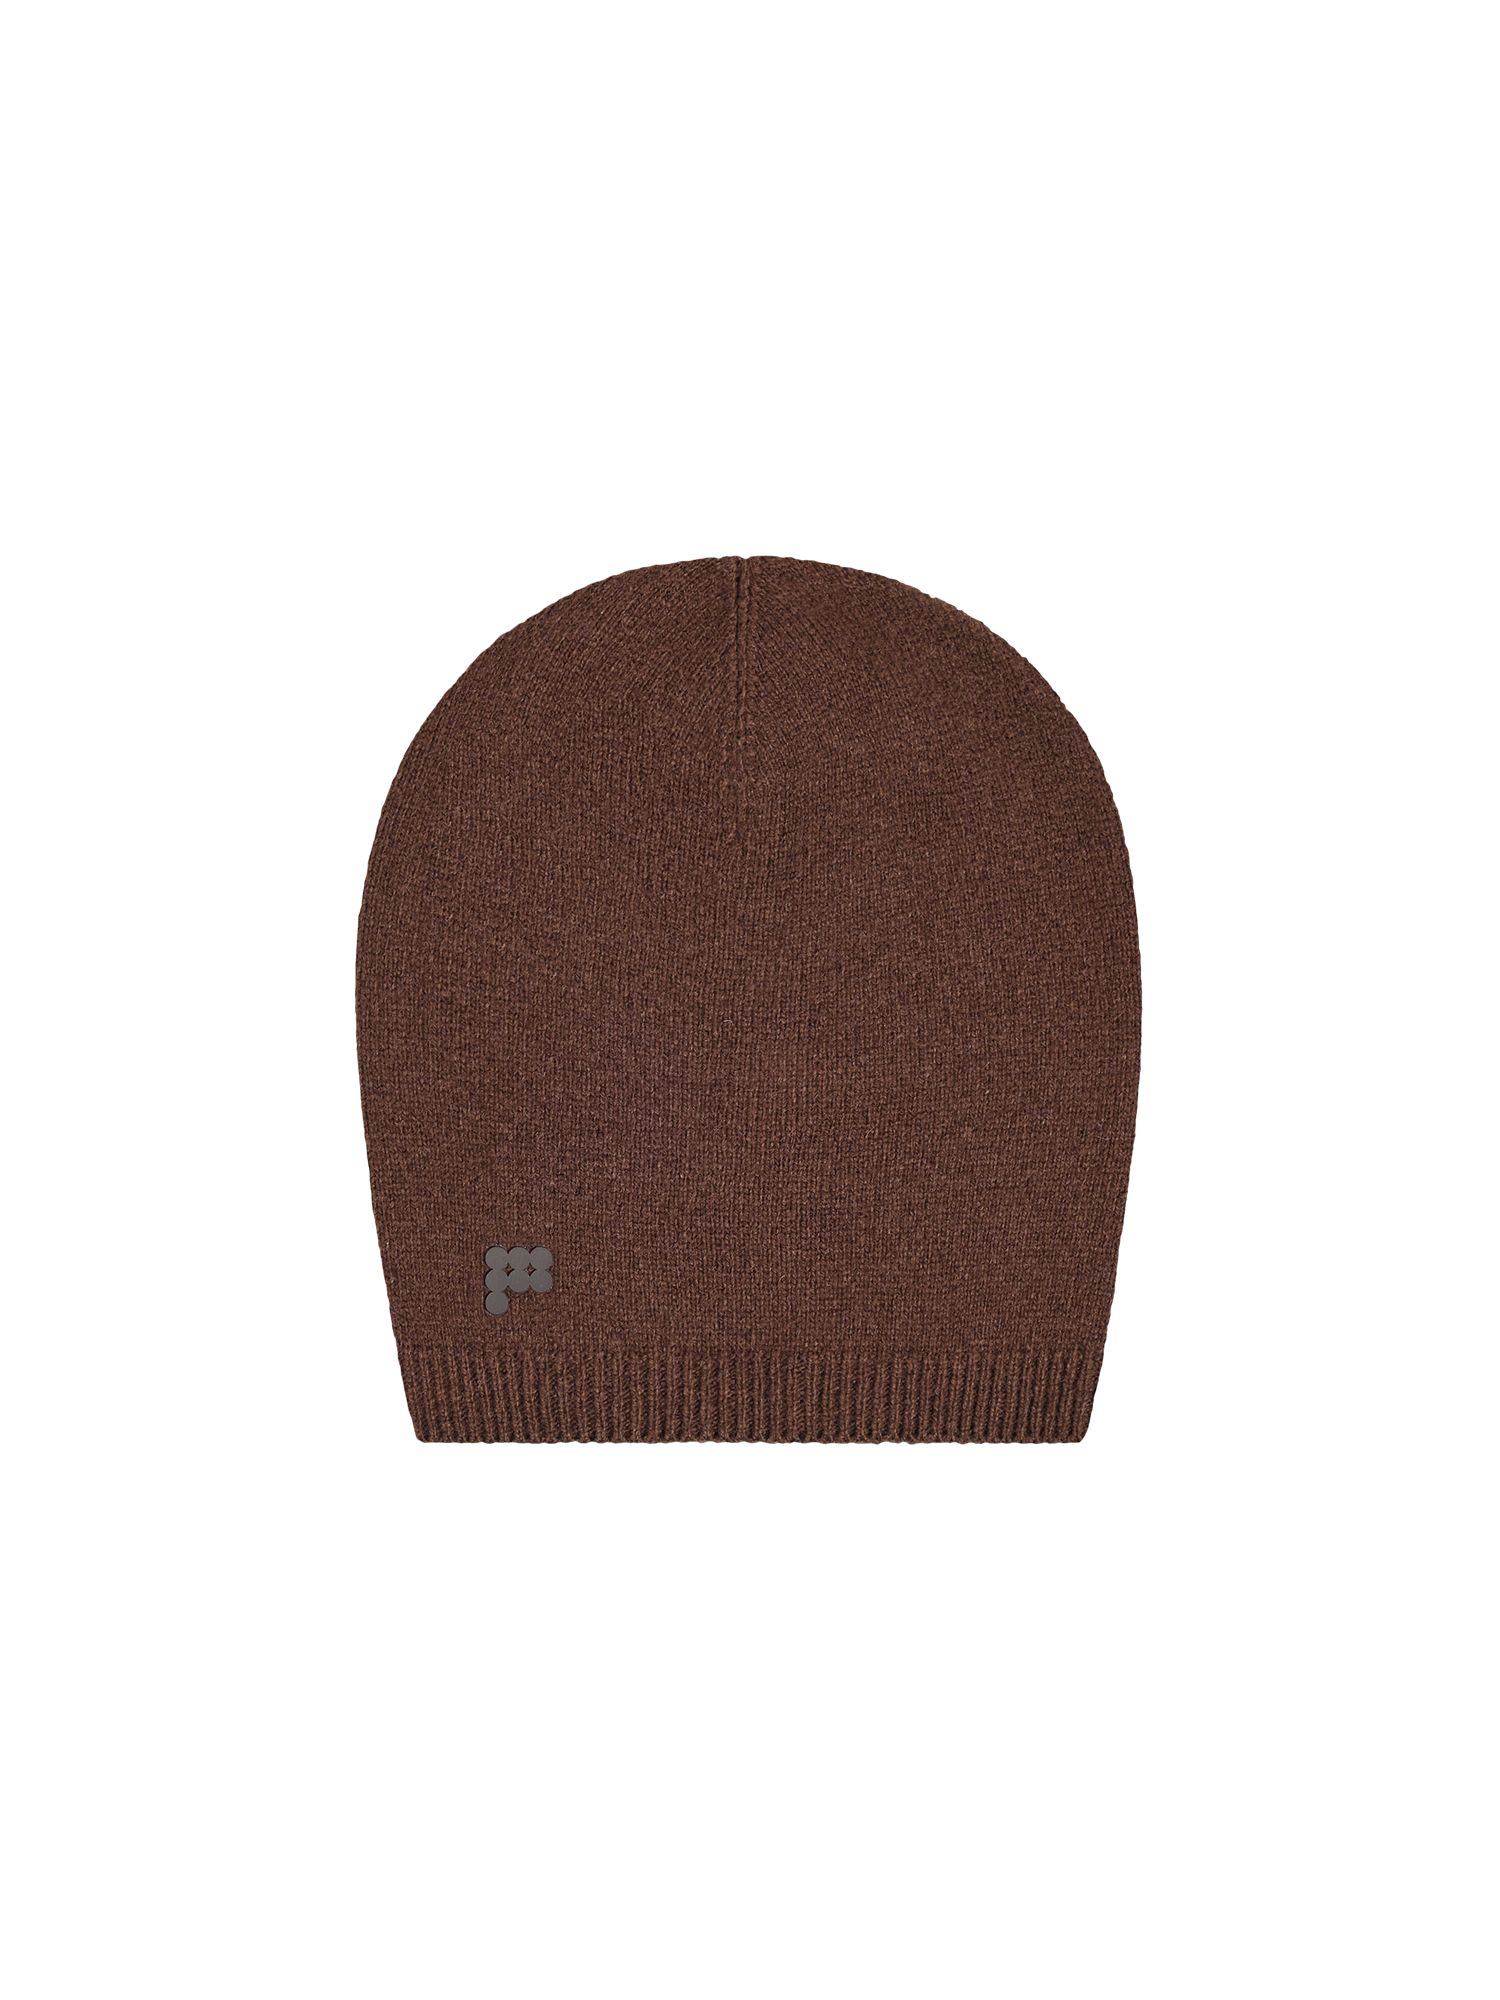 Recycled Cashmere Beanie—chestnut brown-packshot-3